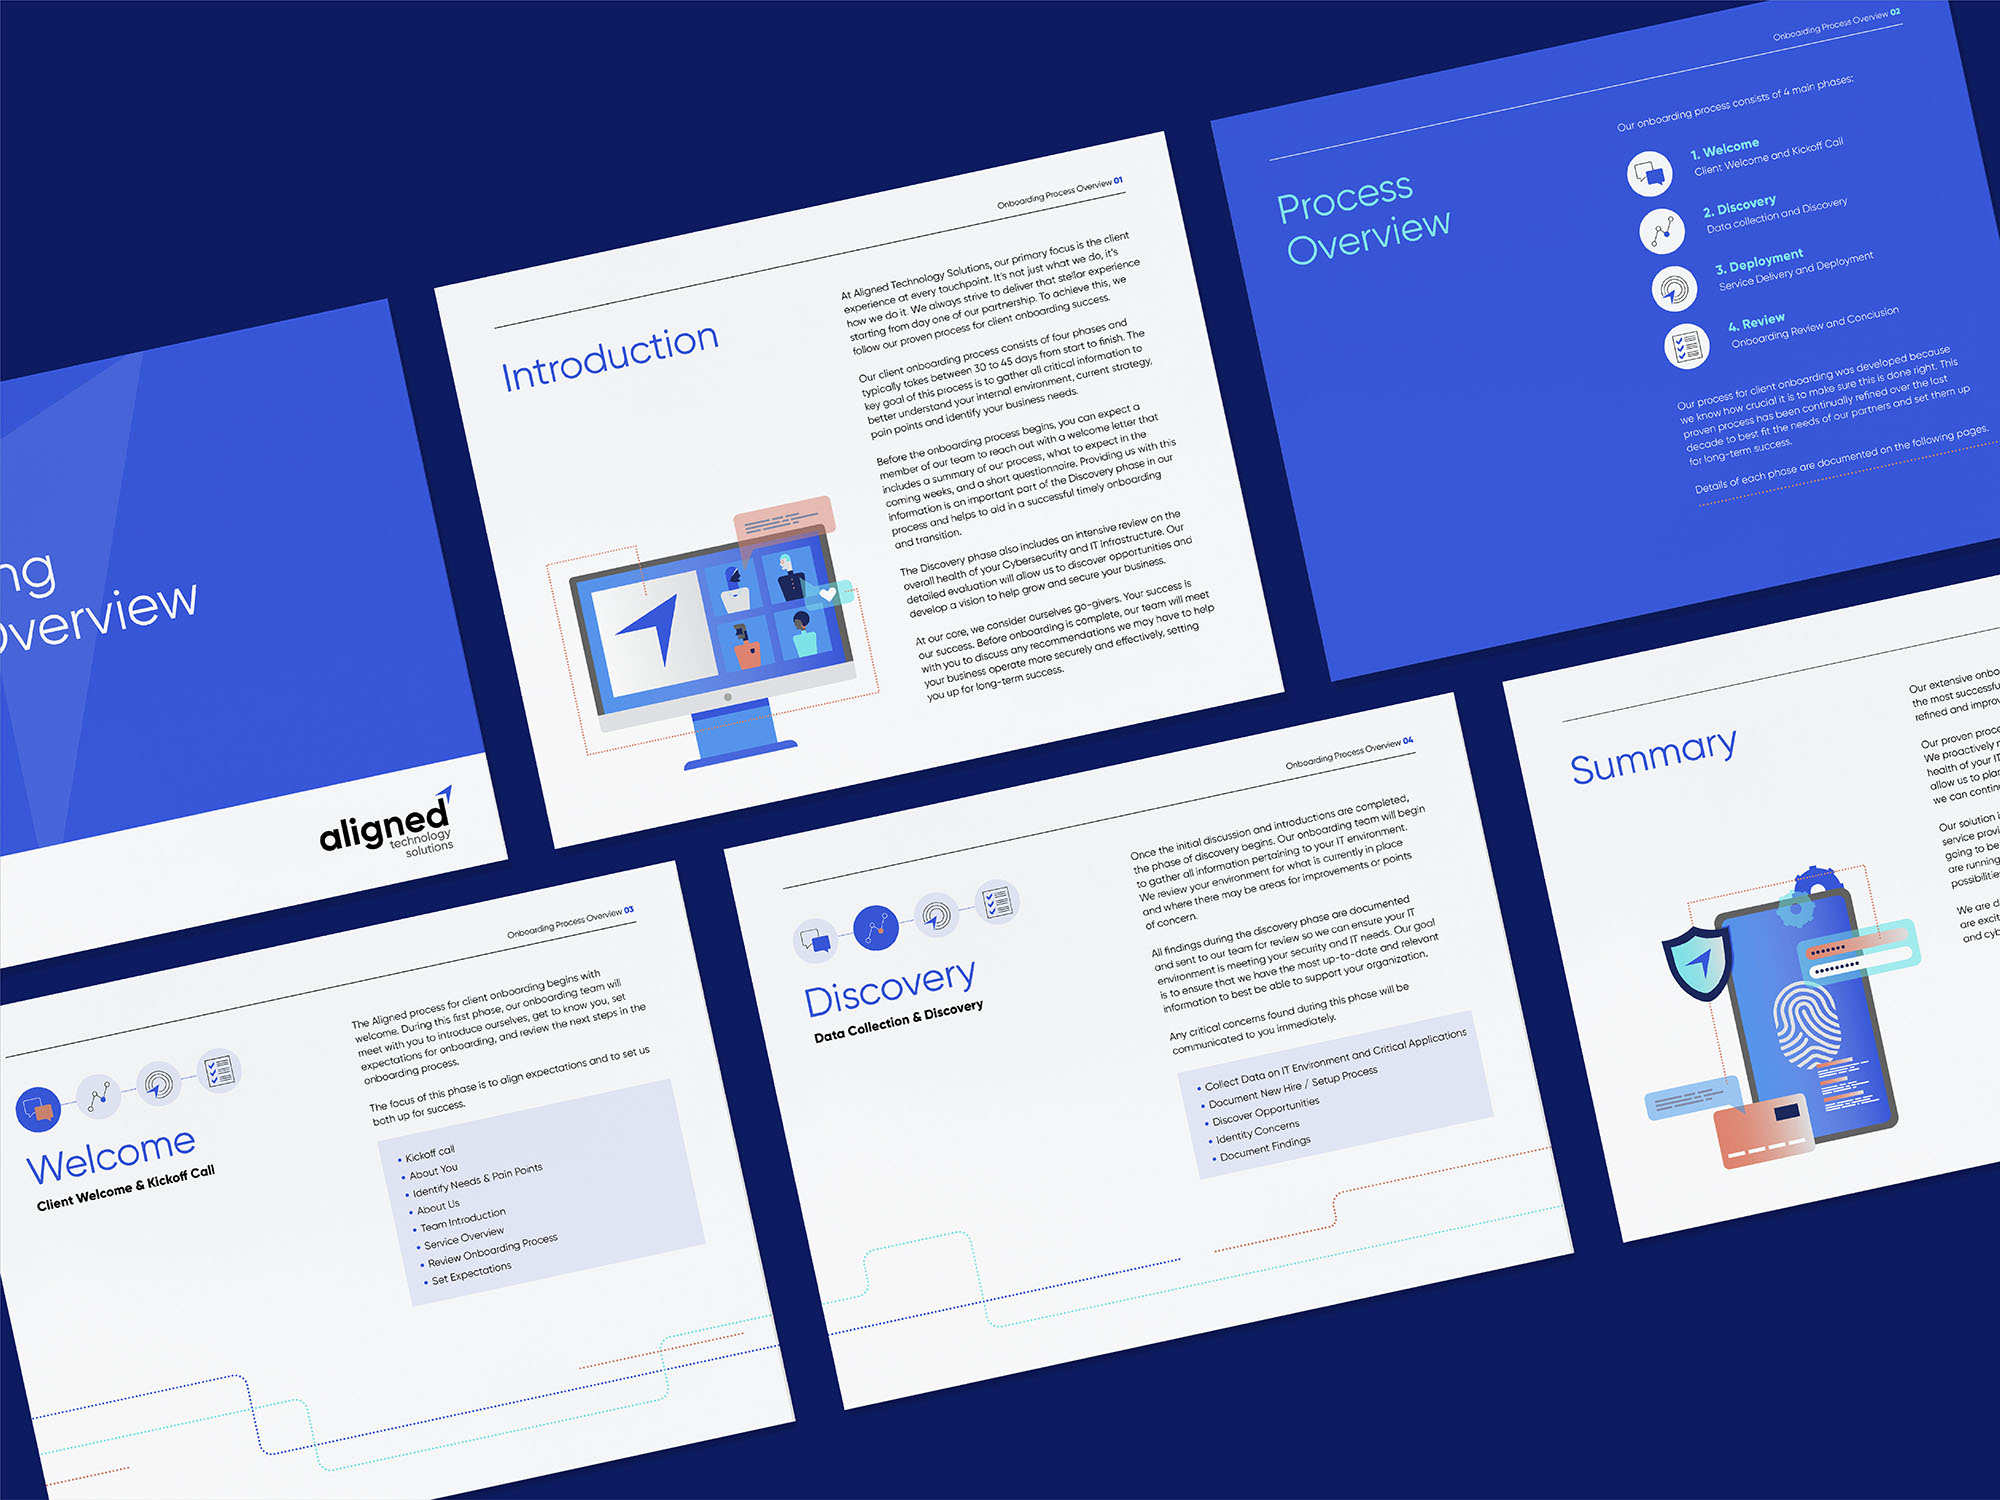 Sample pages from an onboarding document.